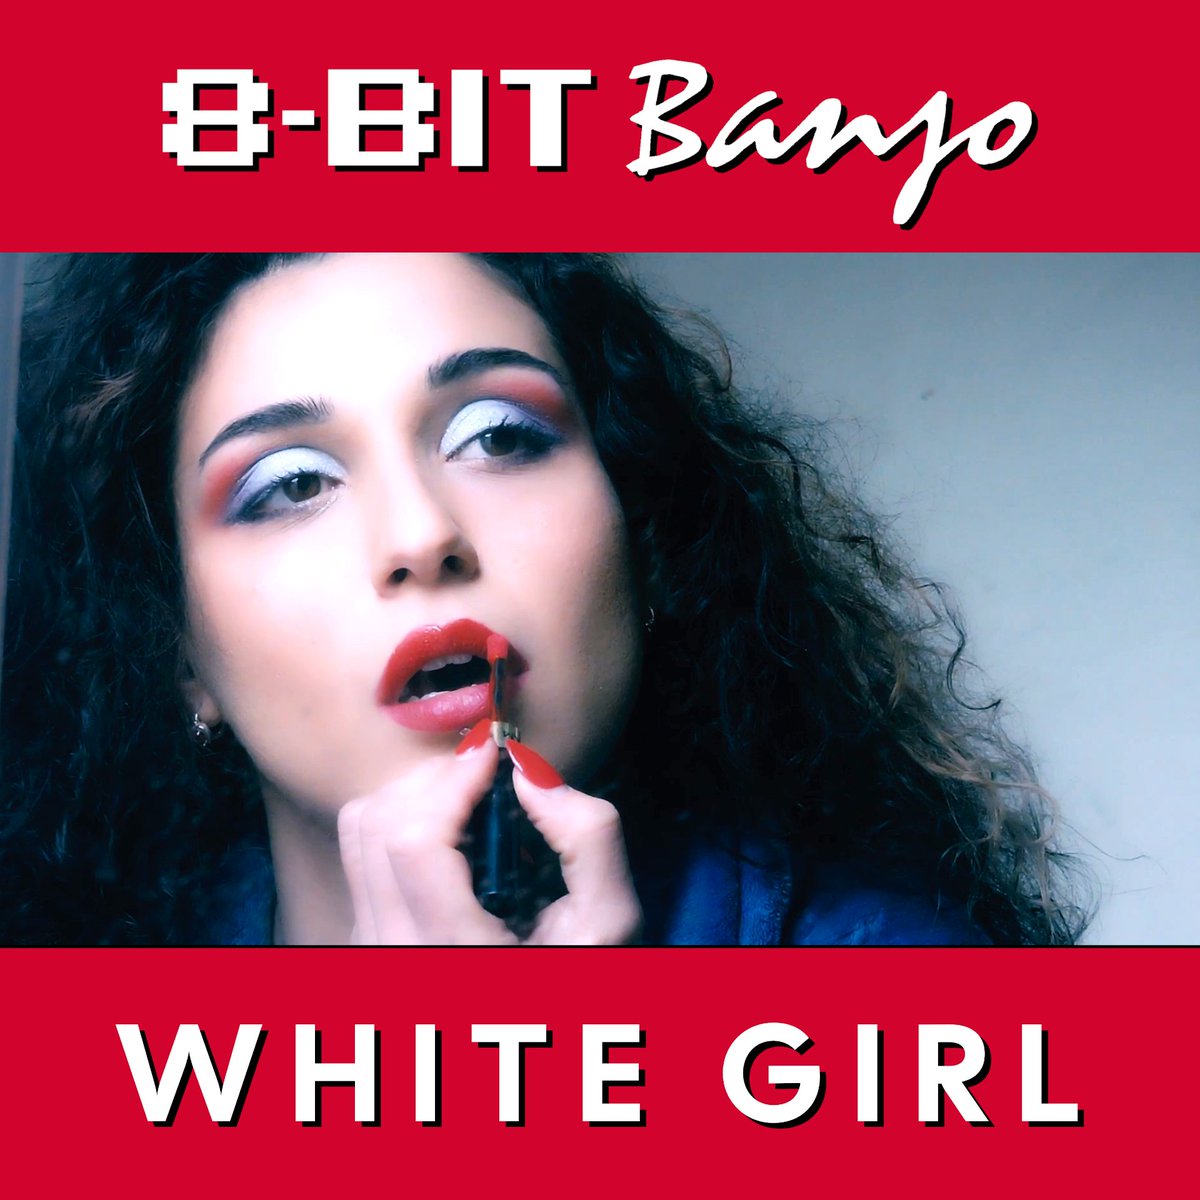 White Girl by @8bitbanjo music video OUT NOW!Starring Zaza
Directed by @kingbippy
Produced by @rirunfilms
Link in bio. 
#musicvideo #punkrockmusic #punkmusic #punkmusicvideo #punk #model #modeling